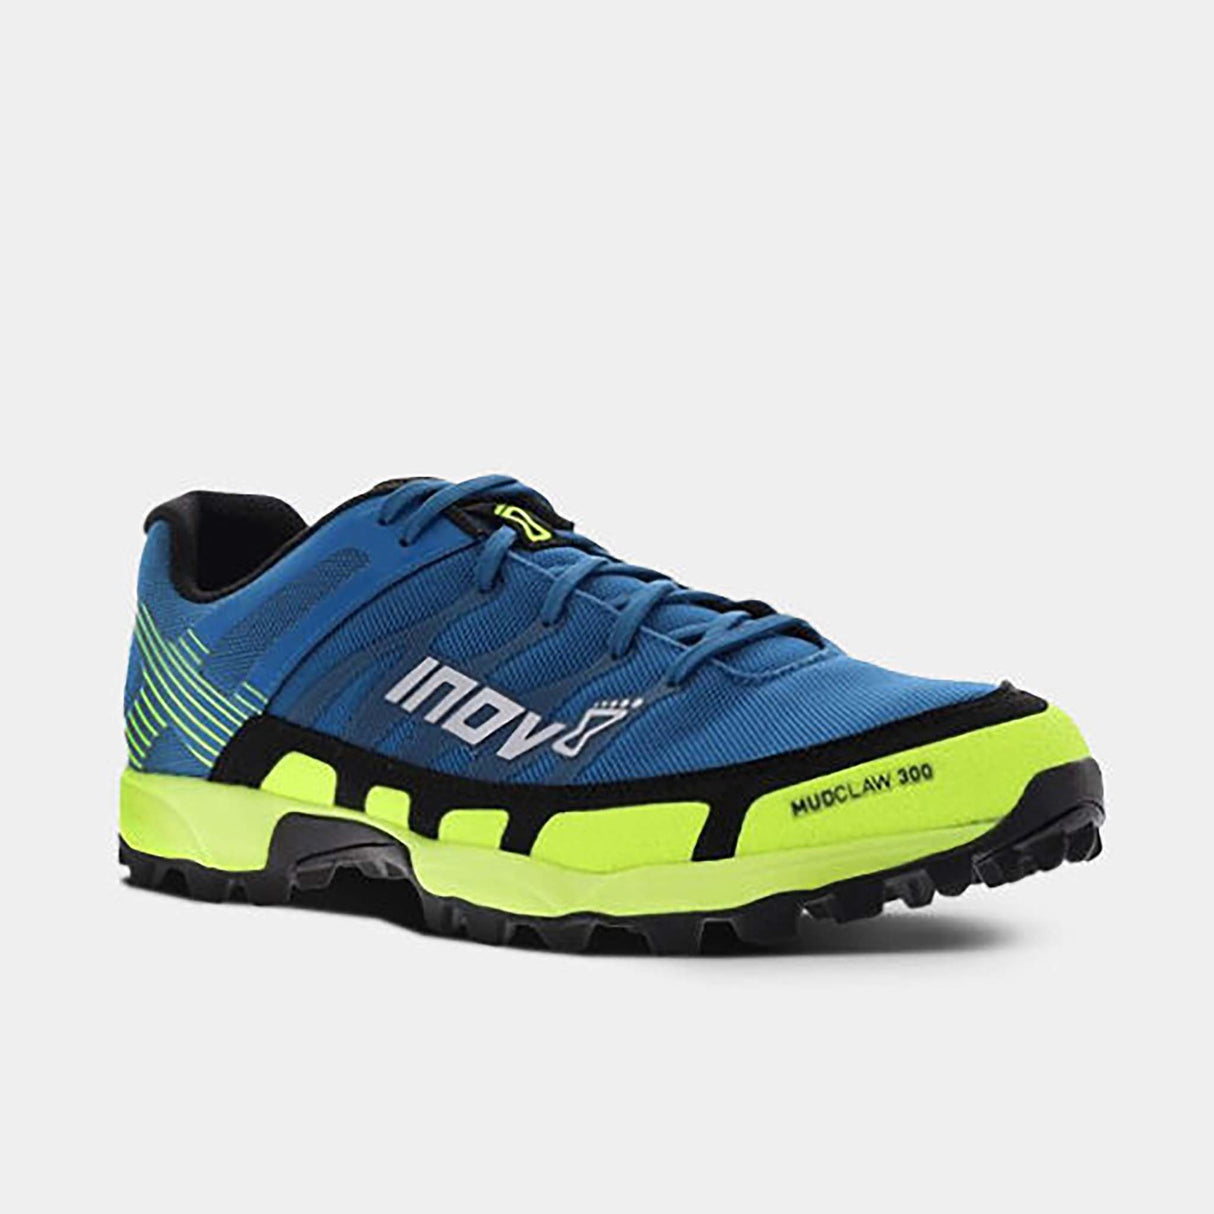 Inov-8 Mudclaw 300 fell running bleu jaune homme lateral